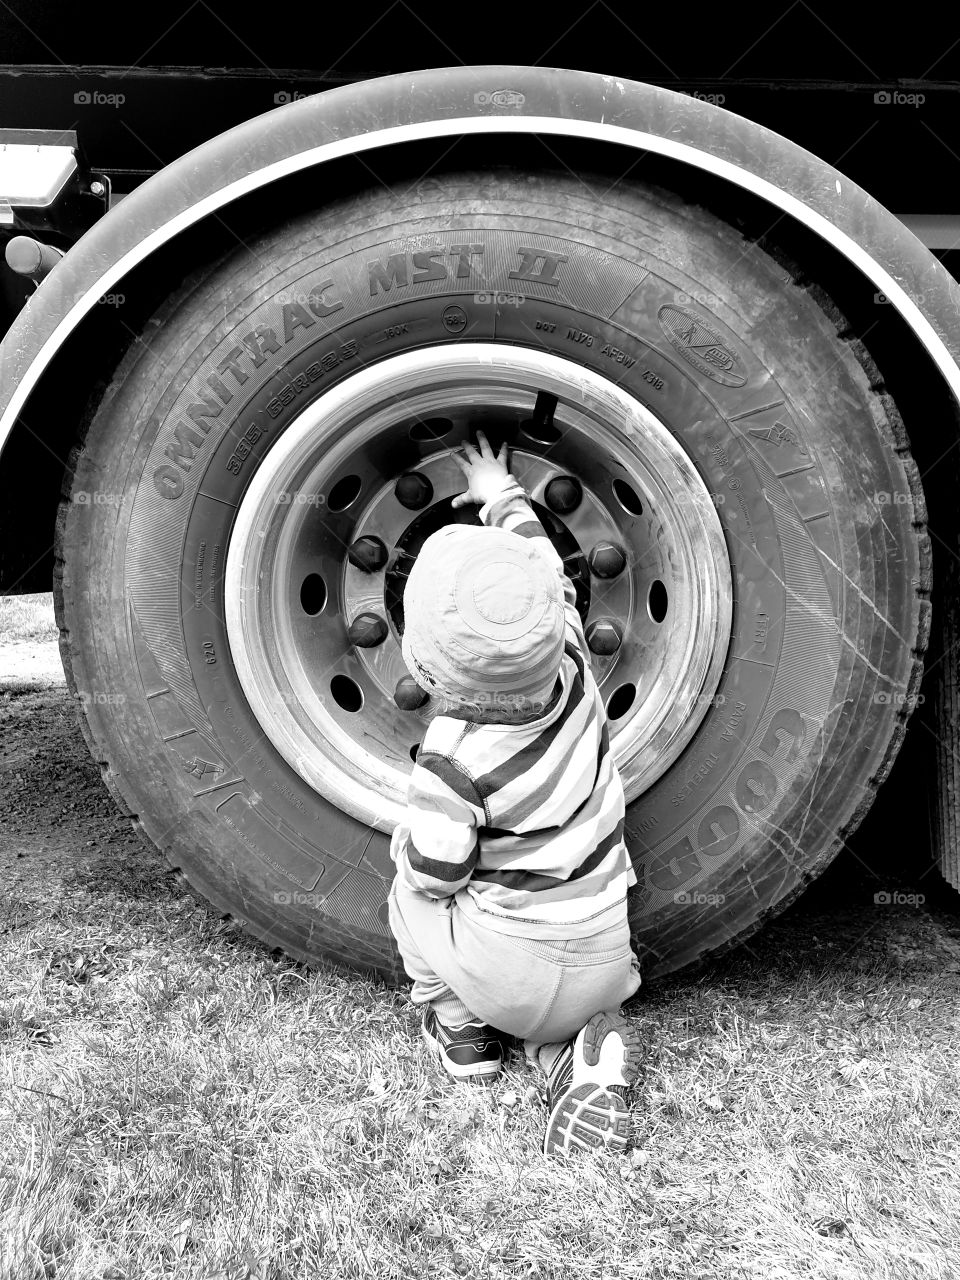 Small child fascinated by a big wheel.